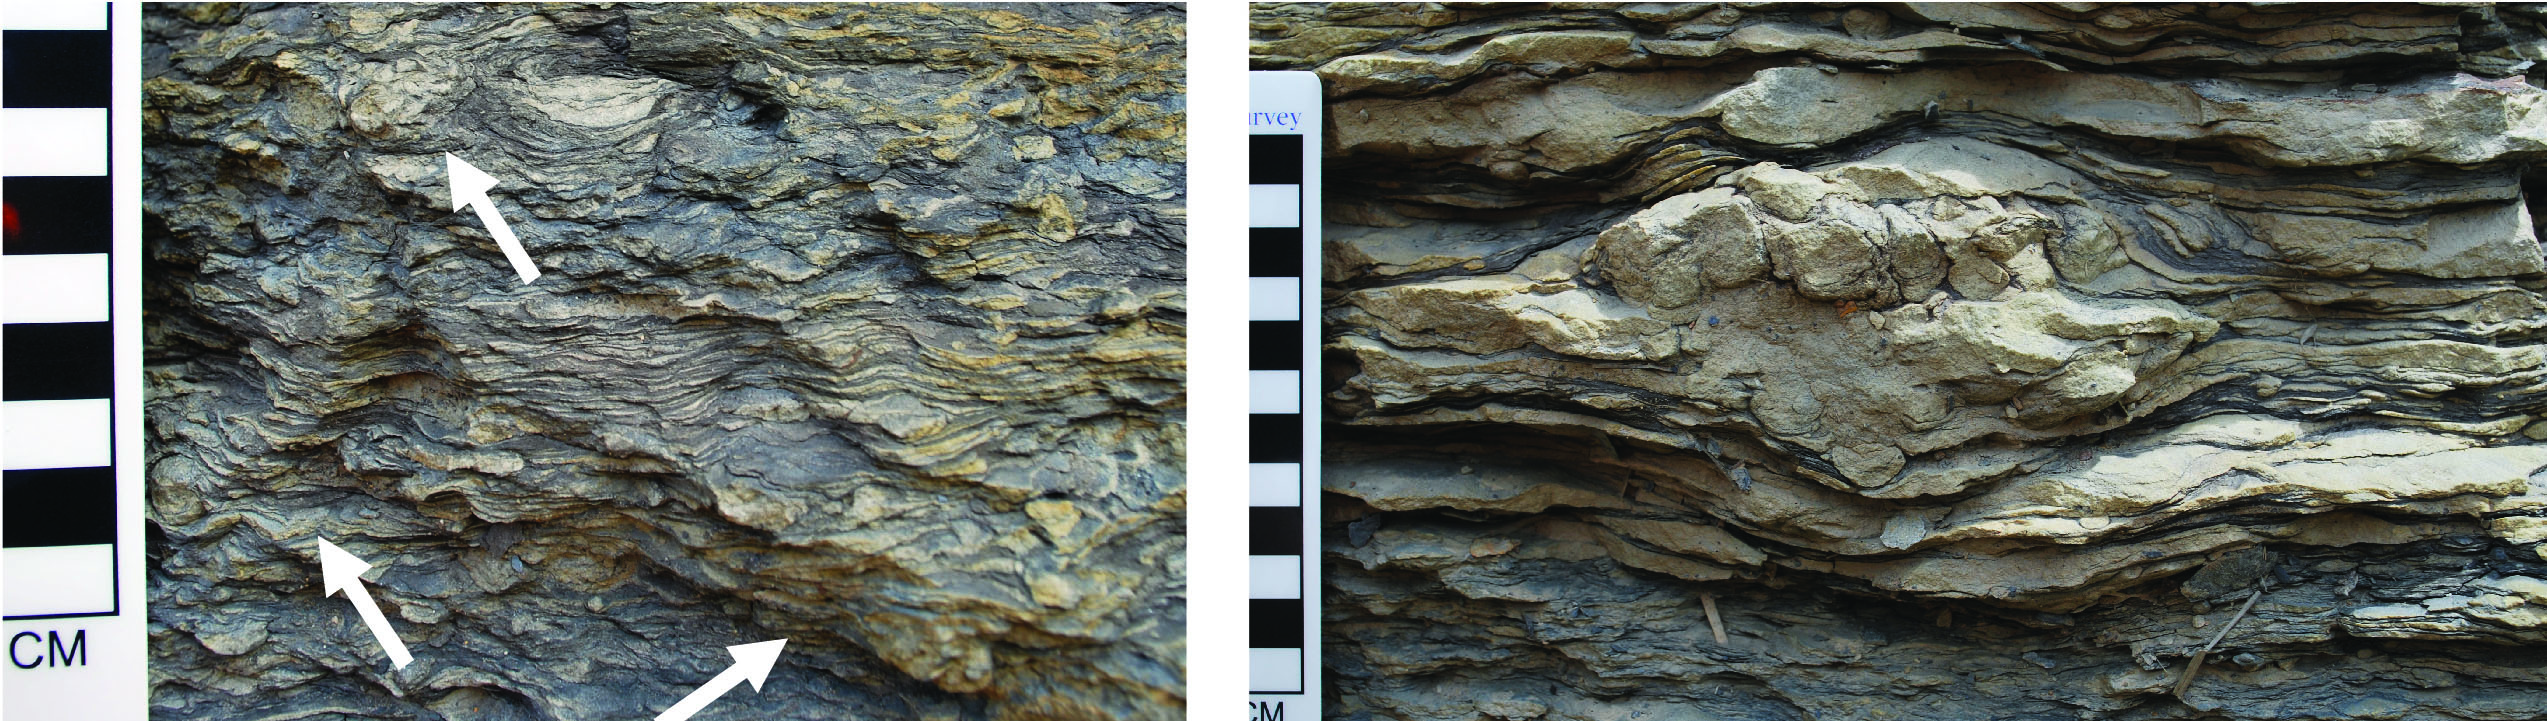 Asterosoma (white arrows) in sandy rock layers interlaminated with thin shale and mudstone. In outcrop, the radiating pattern of this trace is not as obvious as when seen along bedding planes.